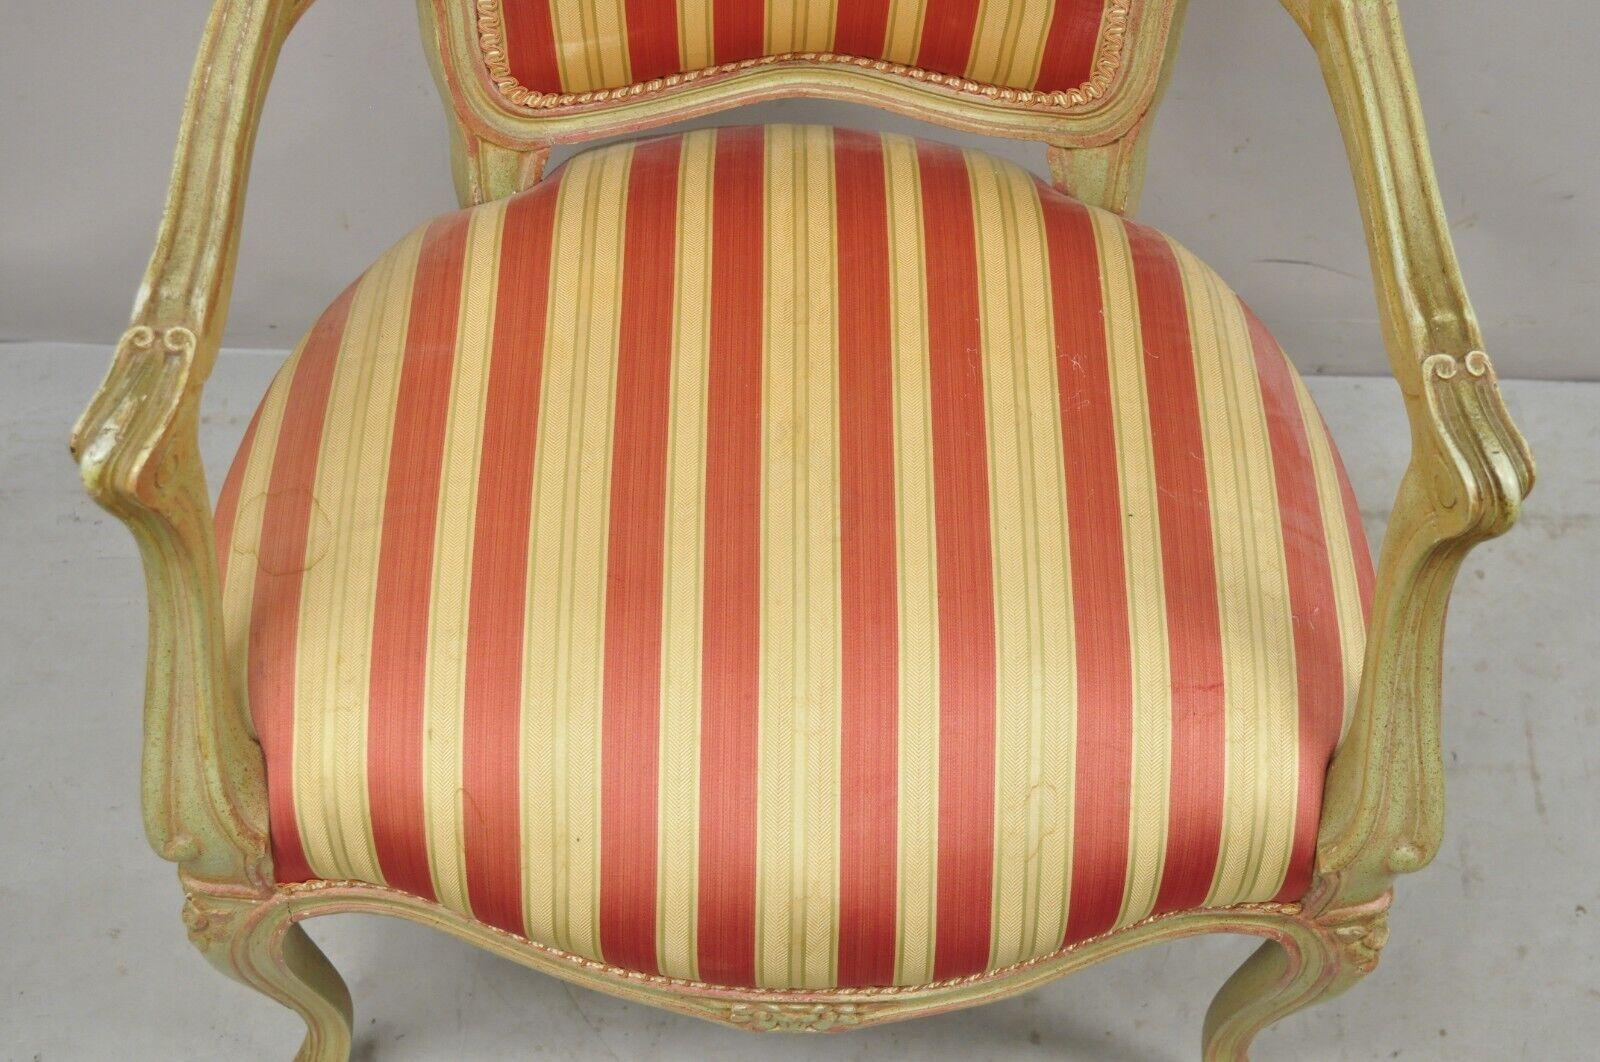 Wood Vtg French Louis XV Style Green & Pink Painted Arm Chair Fauteuil Striped Fabric For Sale